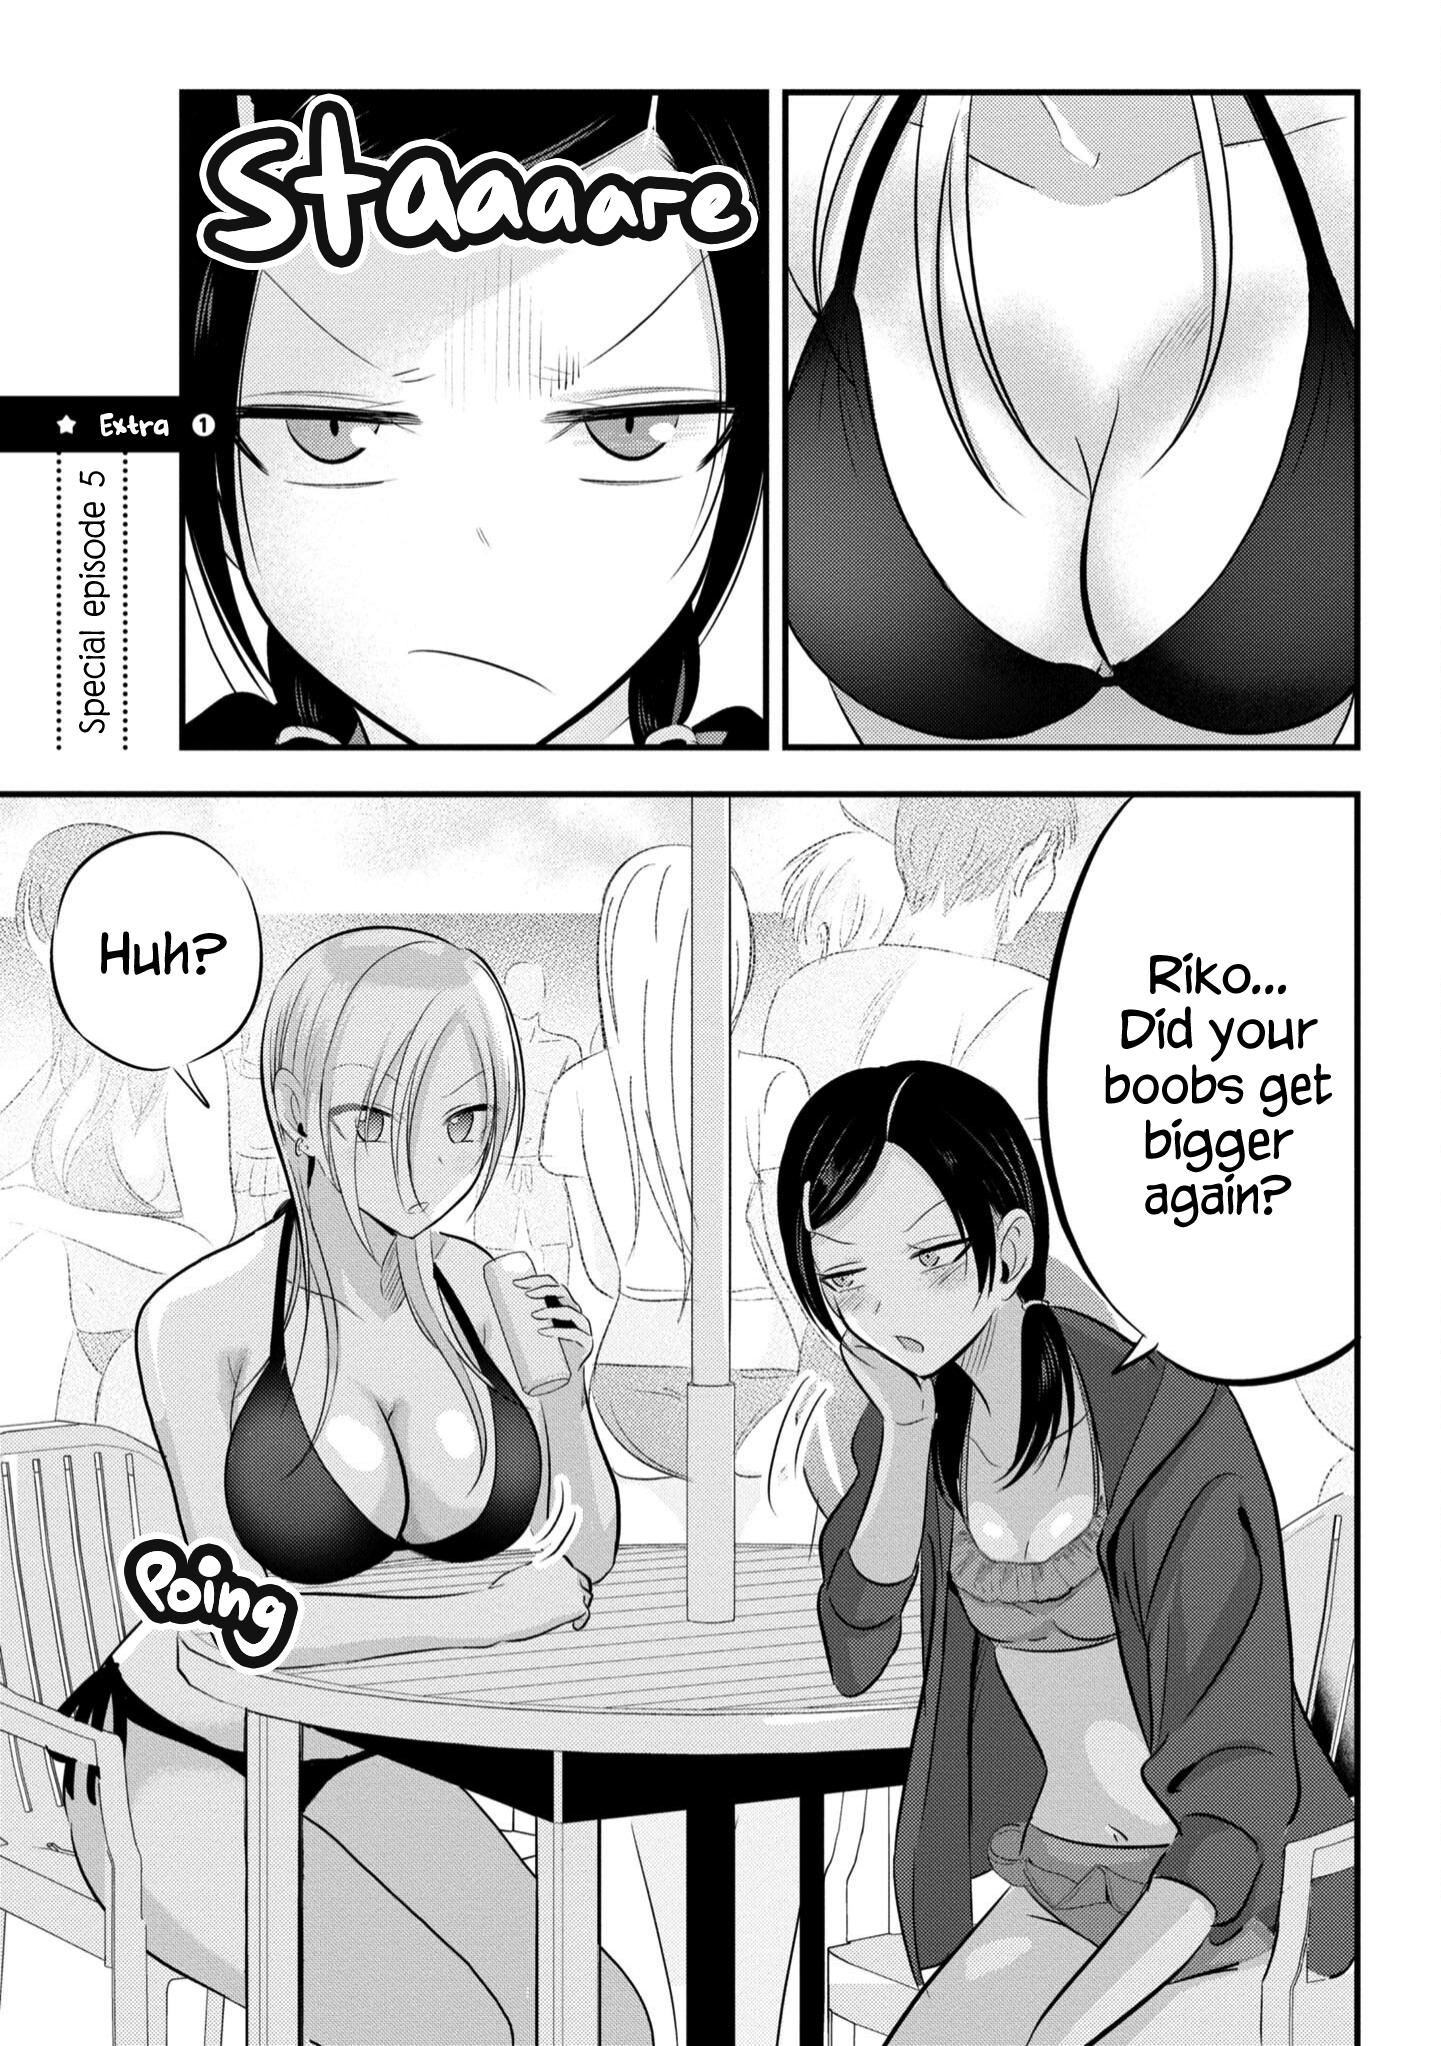 Please Go Home, Akutsu-San! Vol.4 Chapter 88.1: Volume 4 Extra 1 - Picture 1